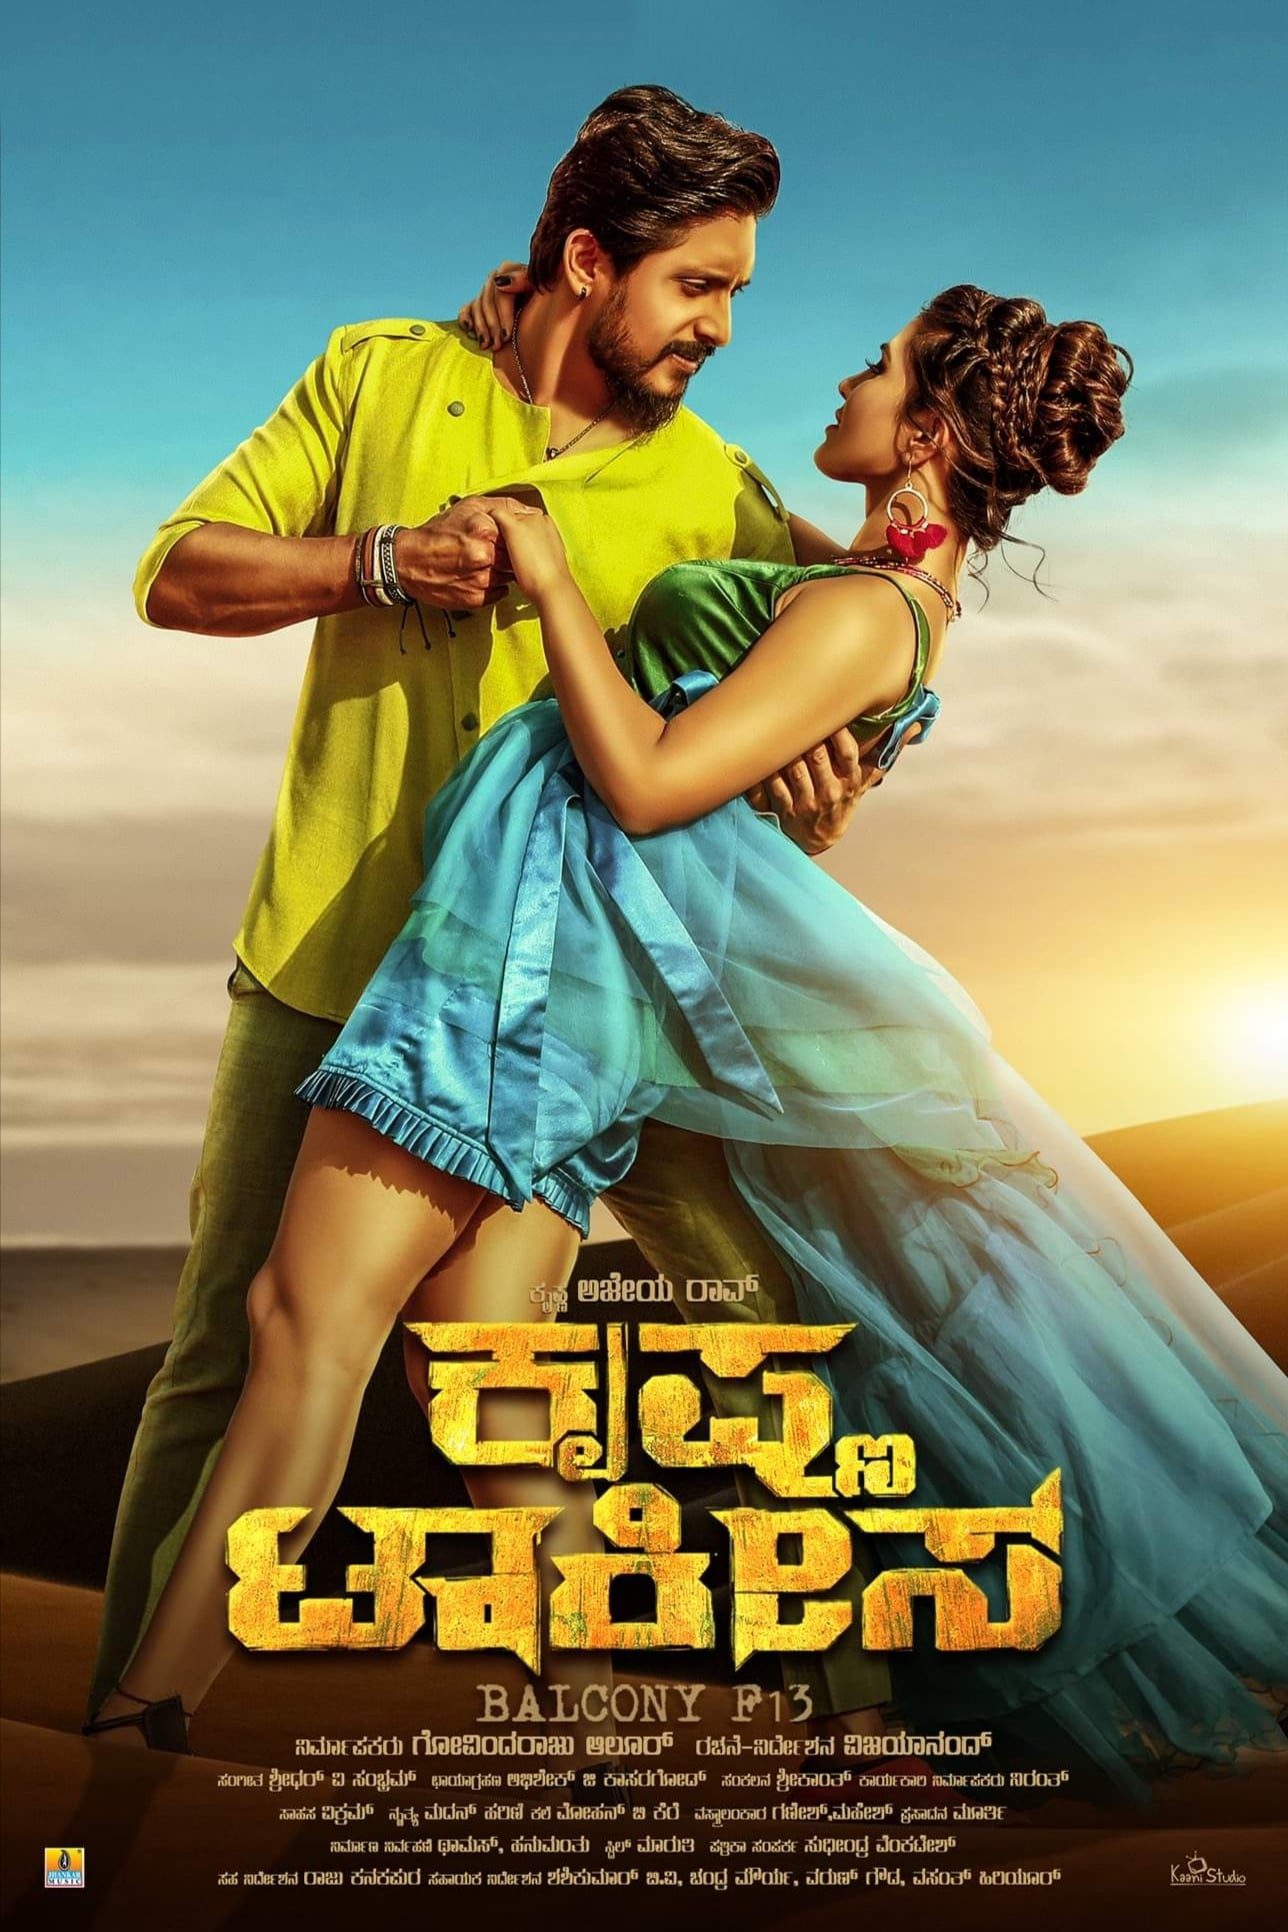 Poster for the movie "Krishna Talkies"